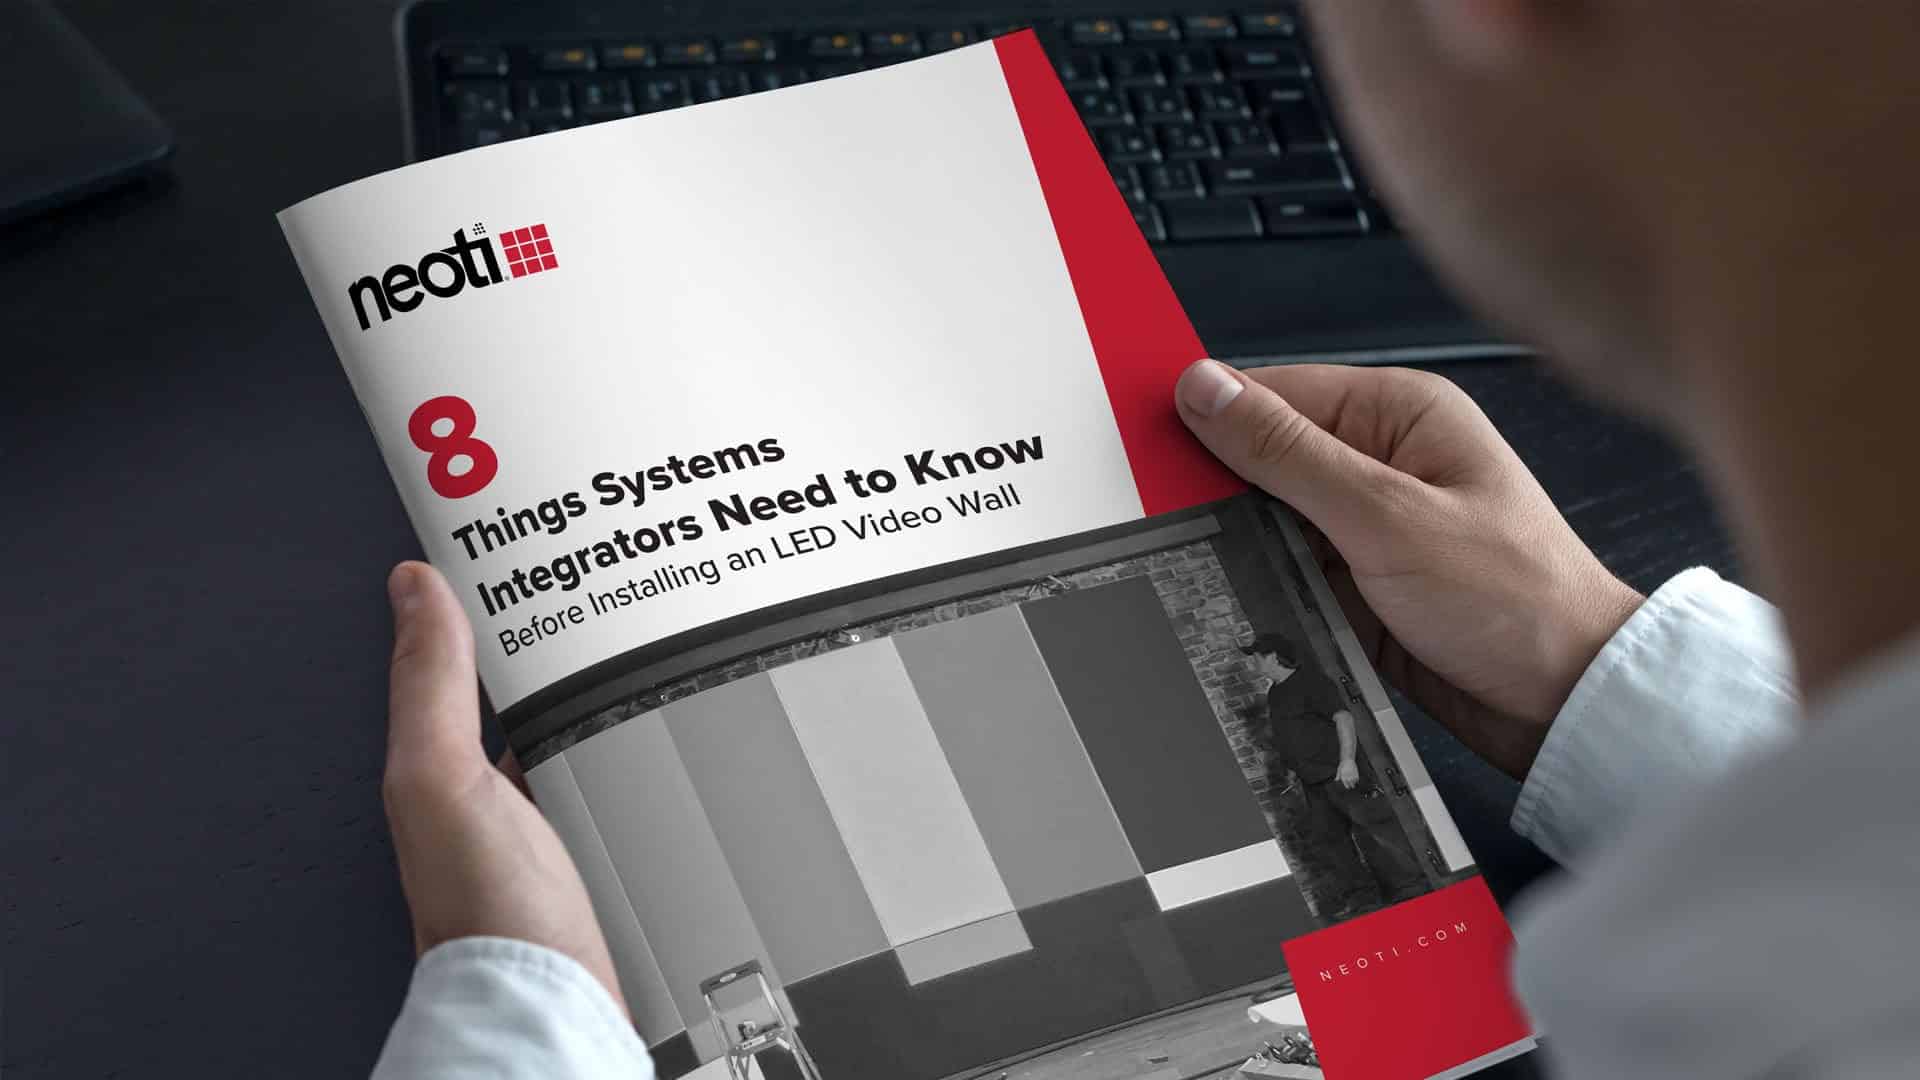 8 Things Integrators Need to Know